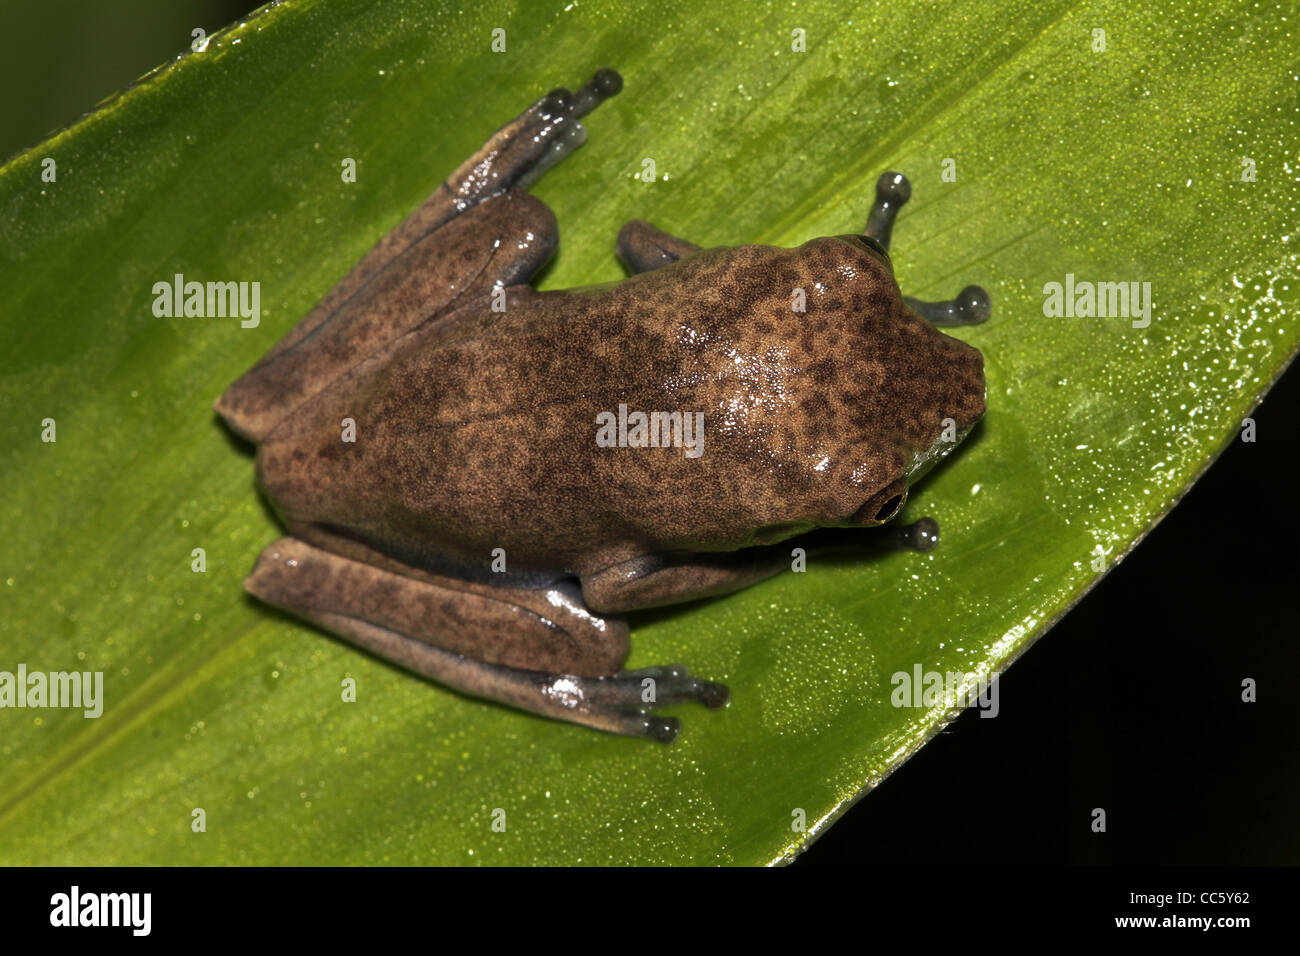 A baby Map Treefrog (Hypsiboas geographicus) in the Peruvian Amazon Stock Photo